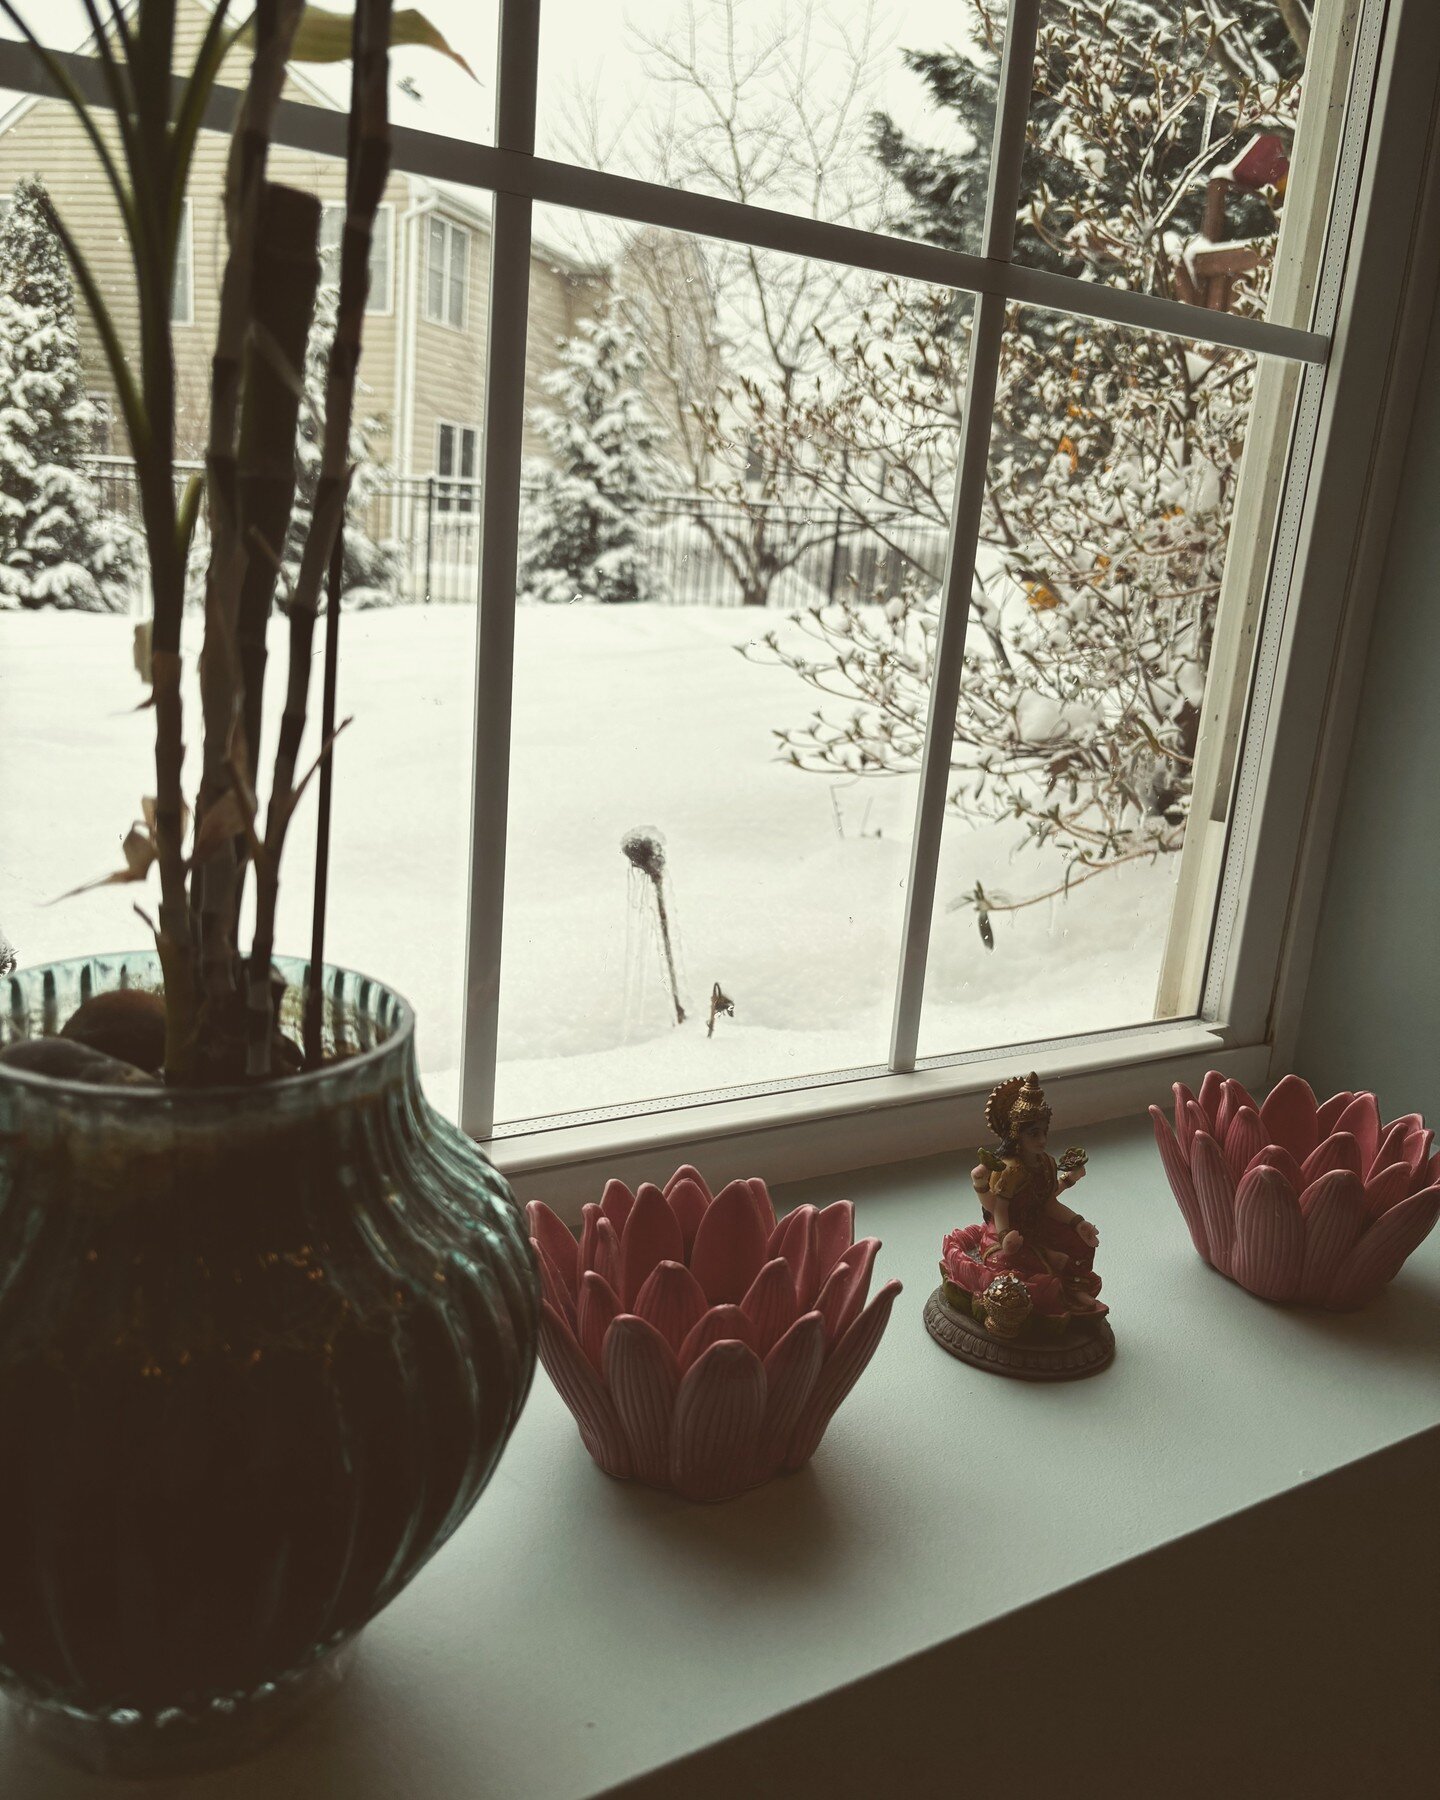 Winter in Chinese Medicine

What are the correspondences associated with the winter in Chinese medicine?

This is the time of rest, regeneration, and stillness. Winter is akin to the bulb in the ground, gathering resources, vibrating with potential, 